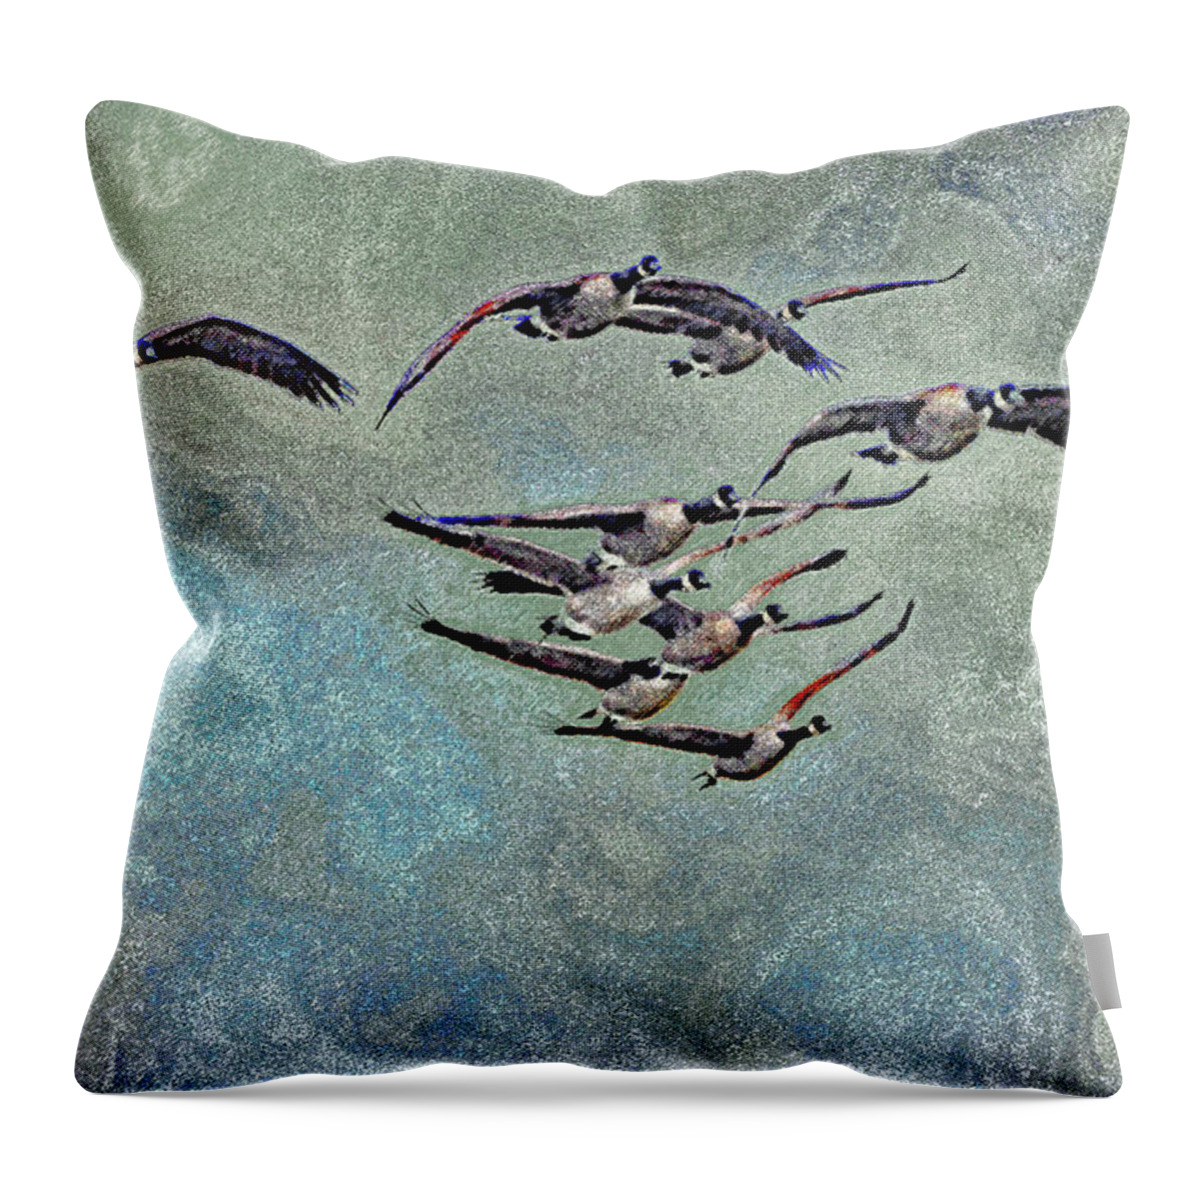 Geese And Clouds Throw Pillow featuring the digital art Geese And Clouds by Tom Janca